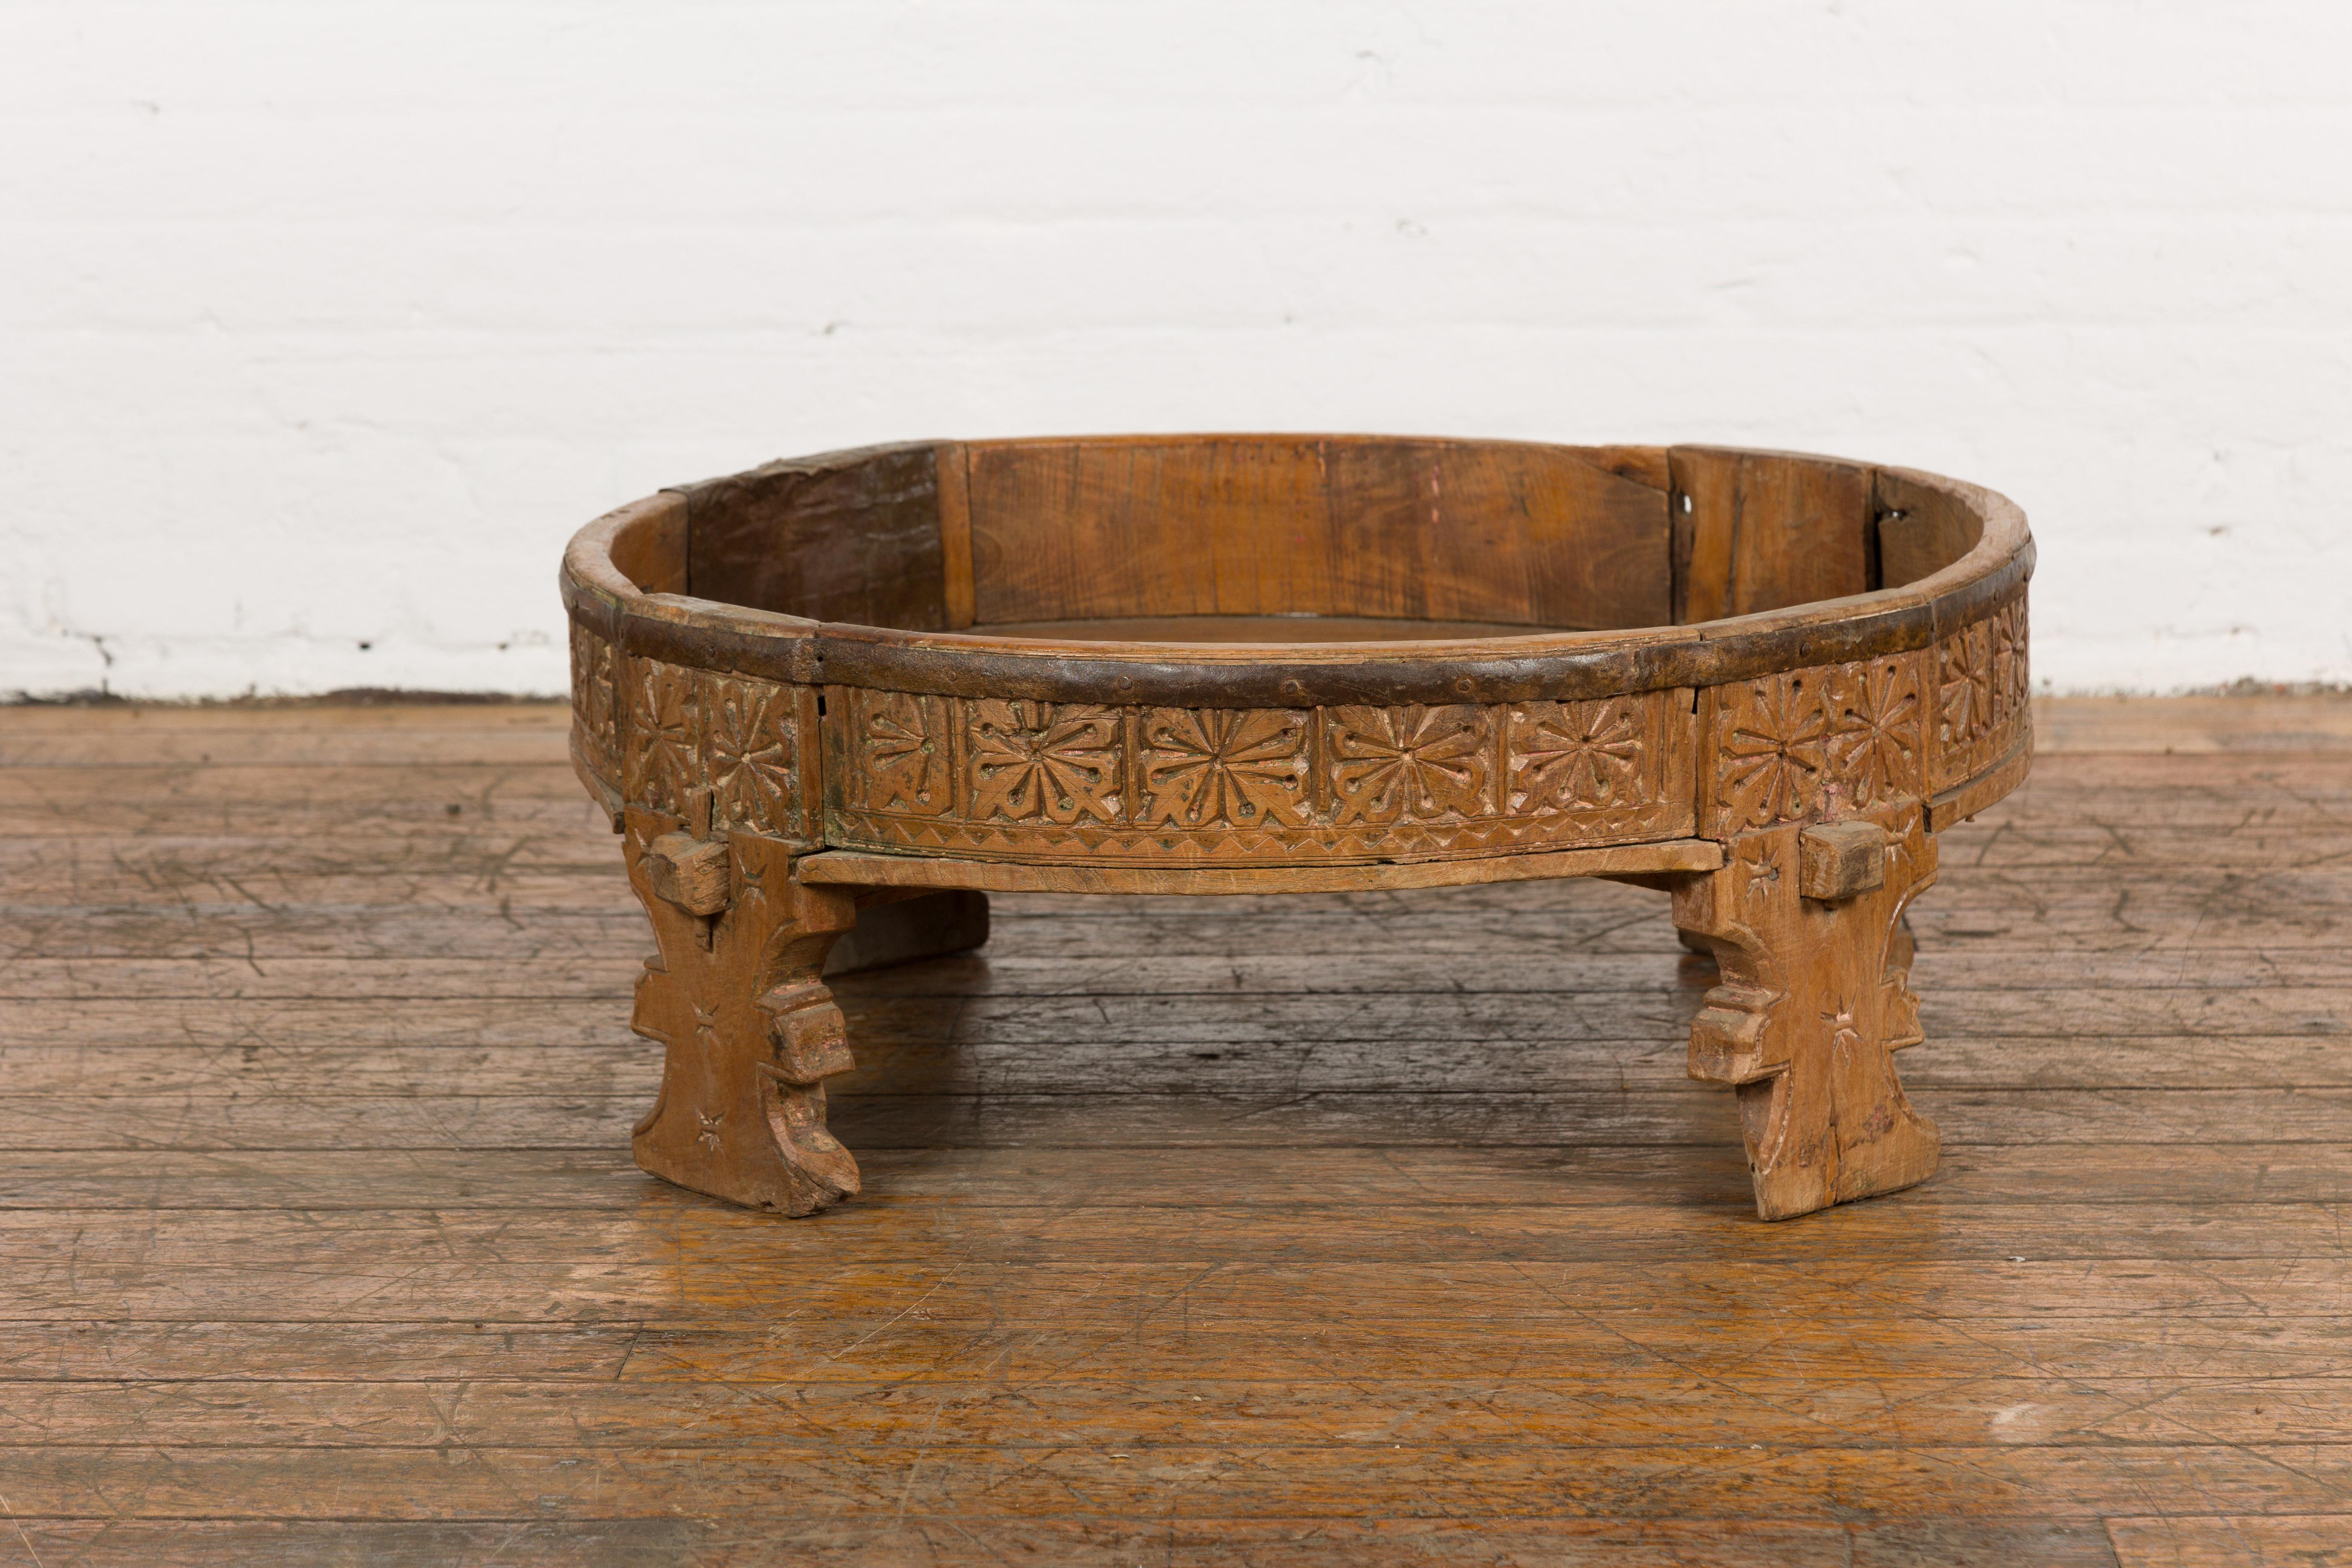 Indian Tribal 1920s Teak Chakki Grinding Table with Geometric Hand-Carved Motifs For Sale 10